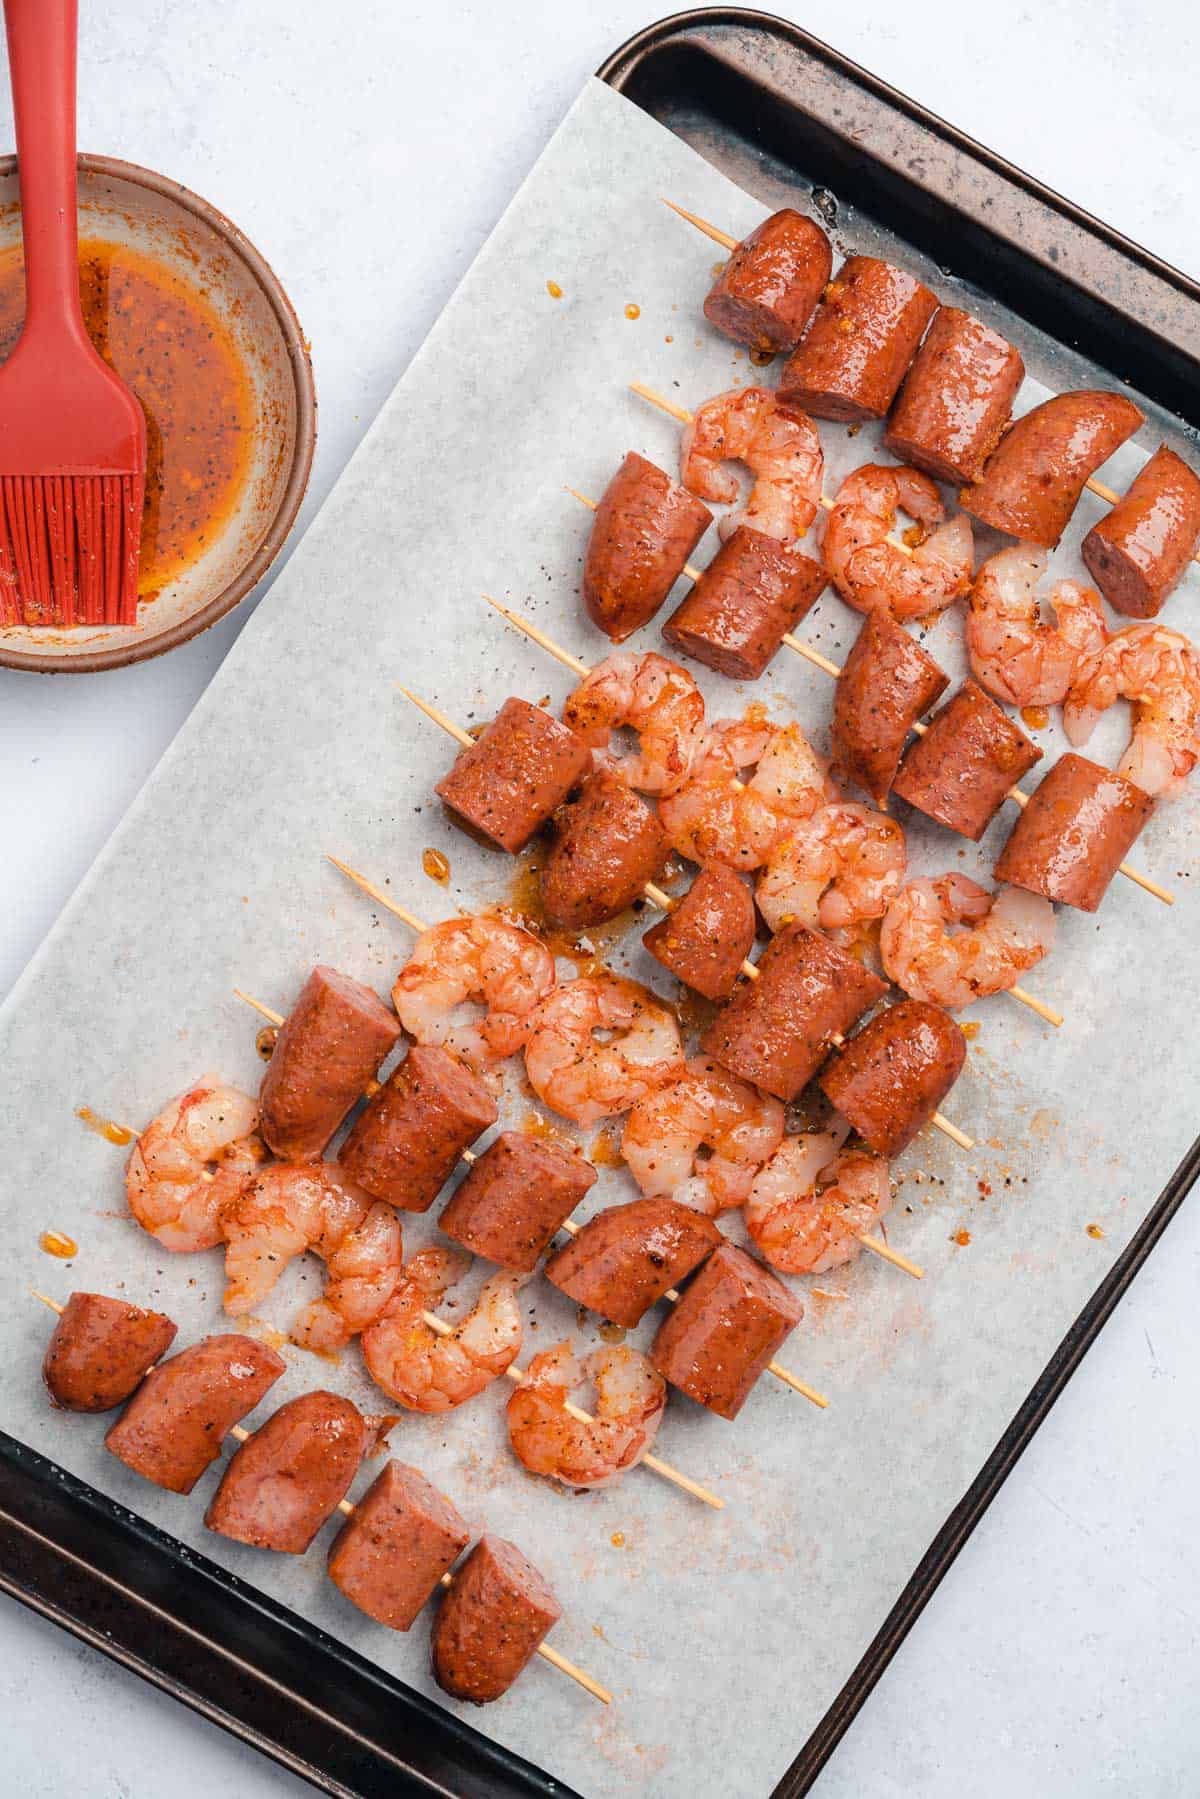 skewered sausage and shrimp on a baking sheet with parchment paper, getting coated in the marinade